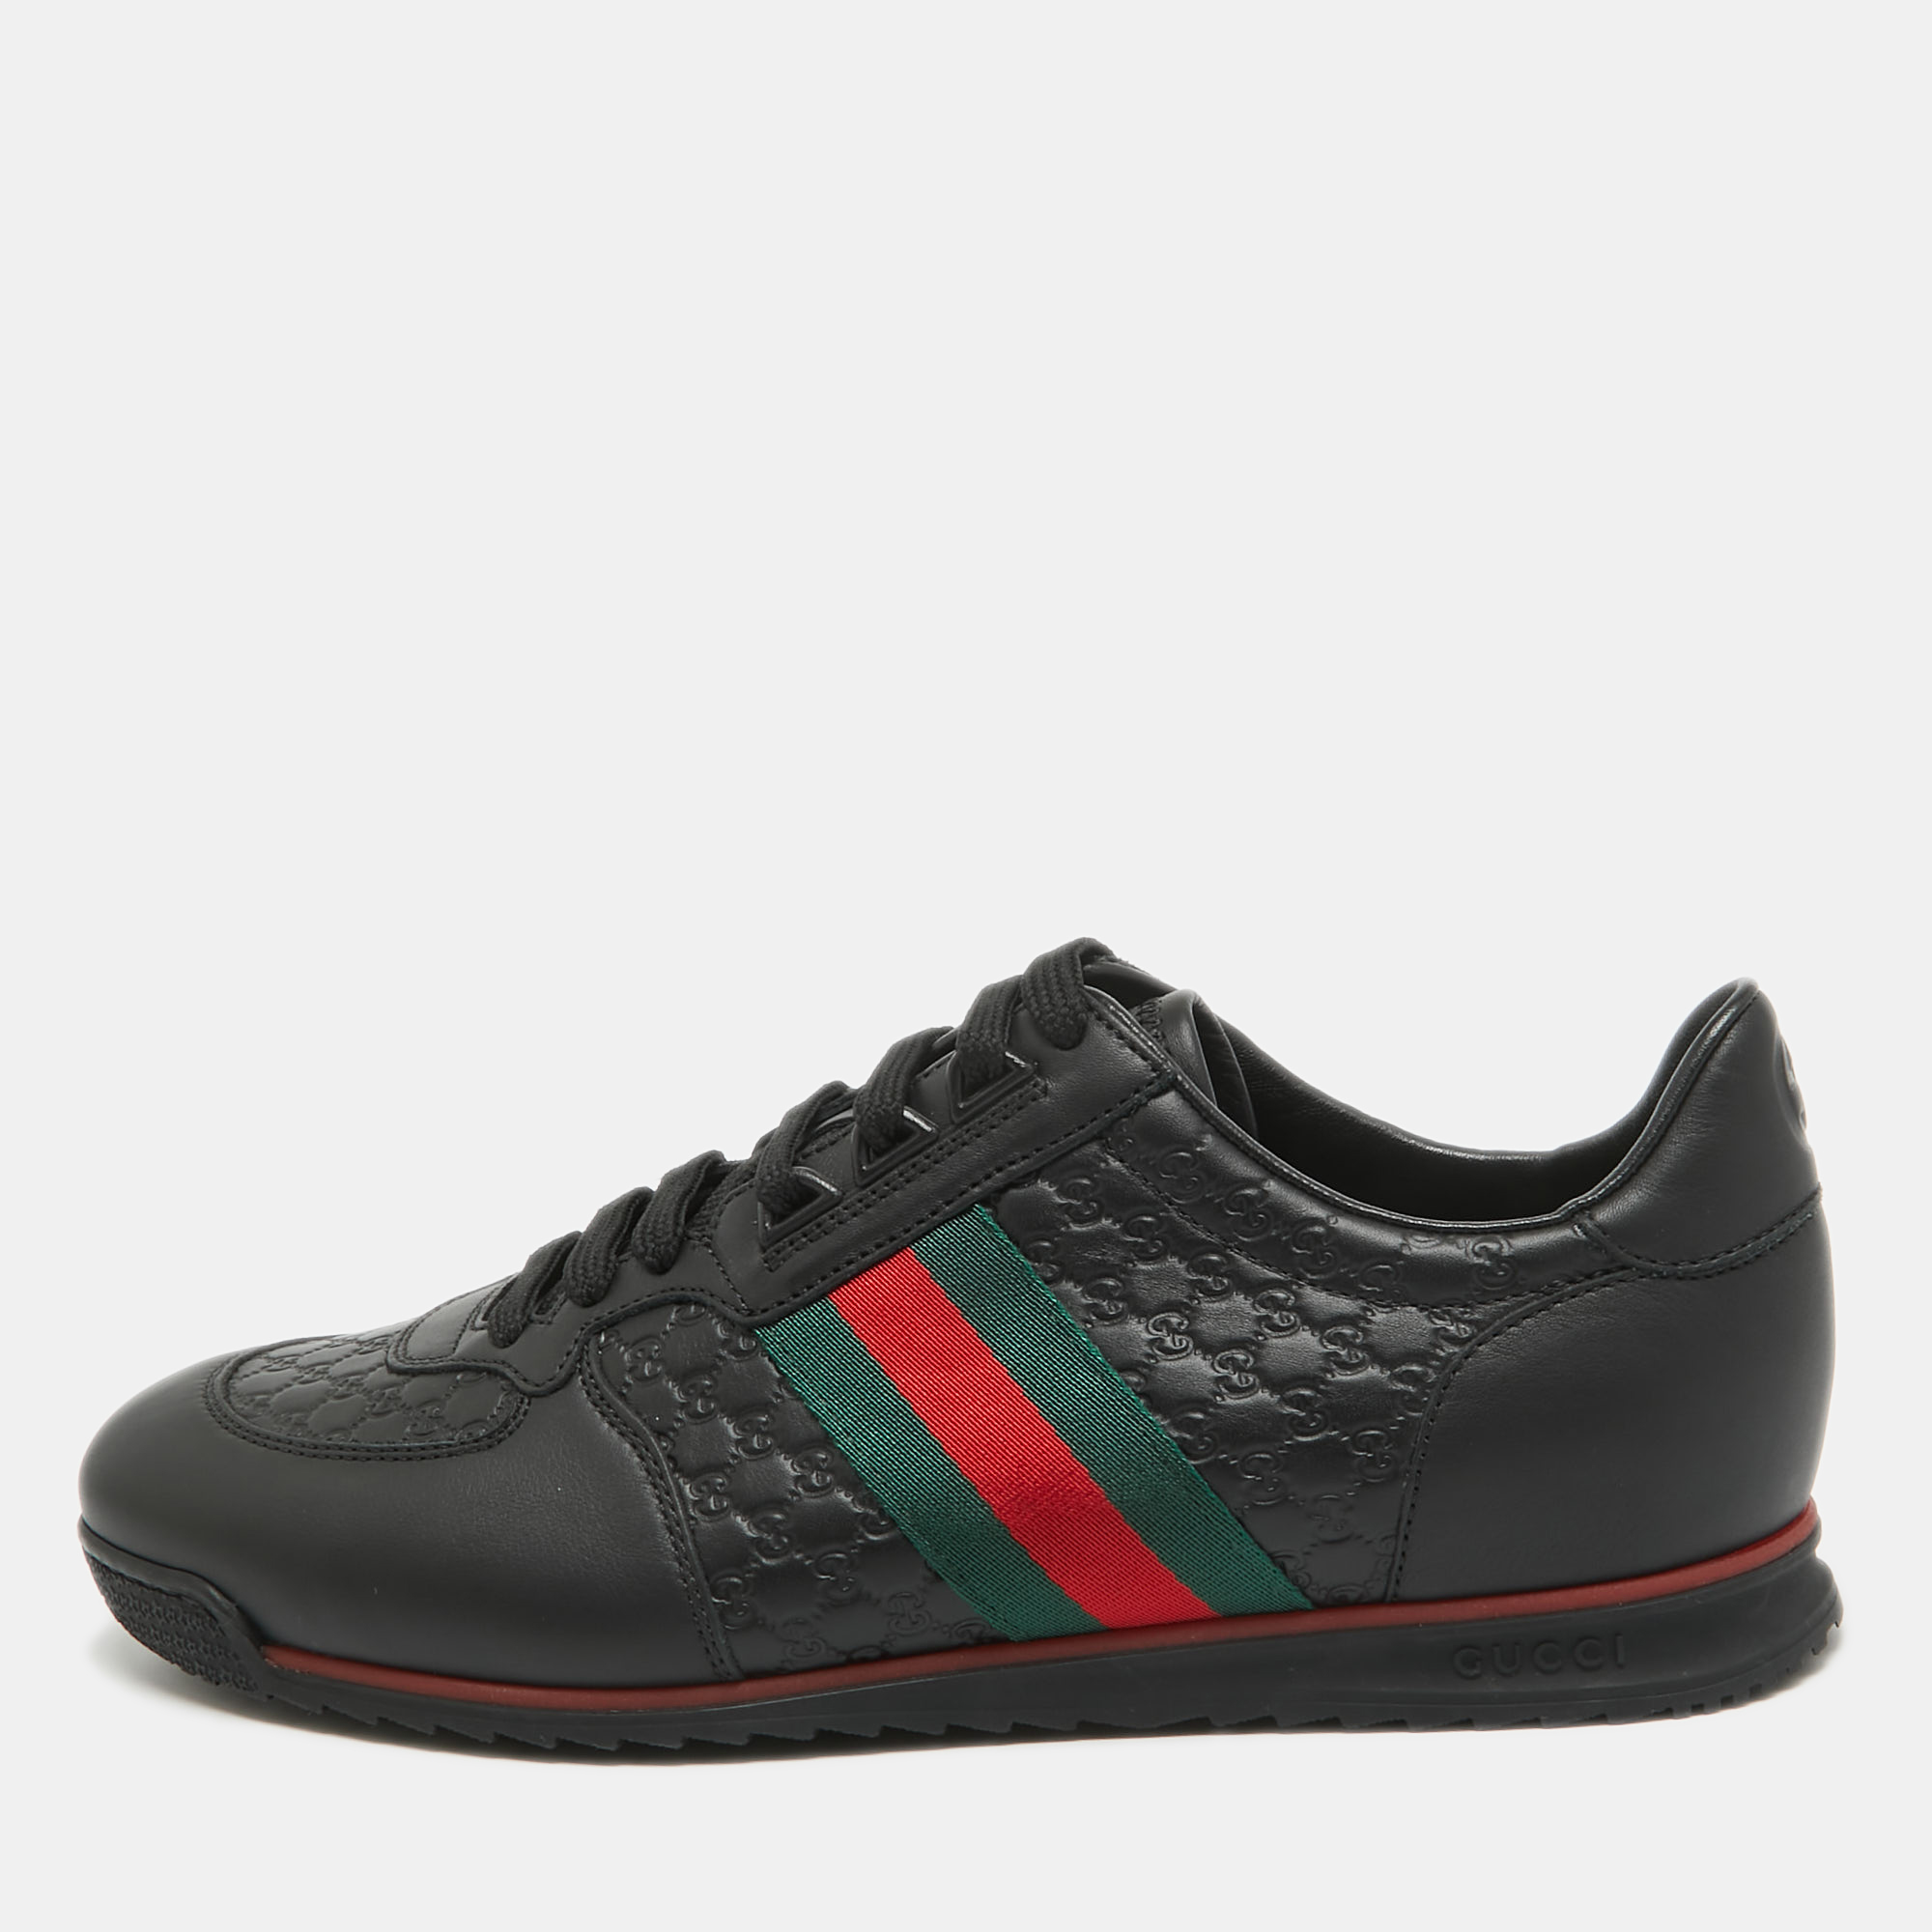 Upgrade your style with these Gucci black sneakers. Meticulously designed for fashion and comfort theyre the ideal choice for a trendy and comfortable stride.